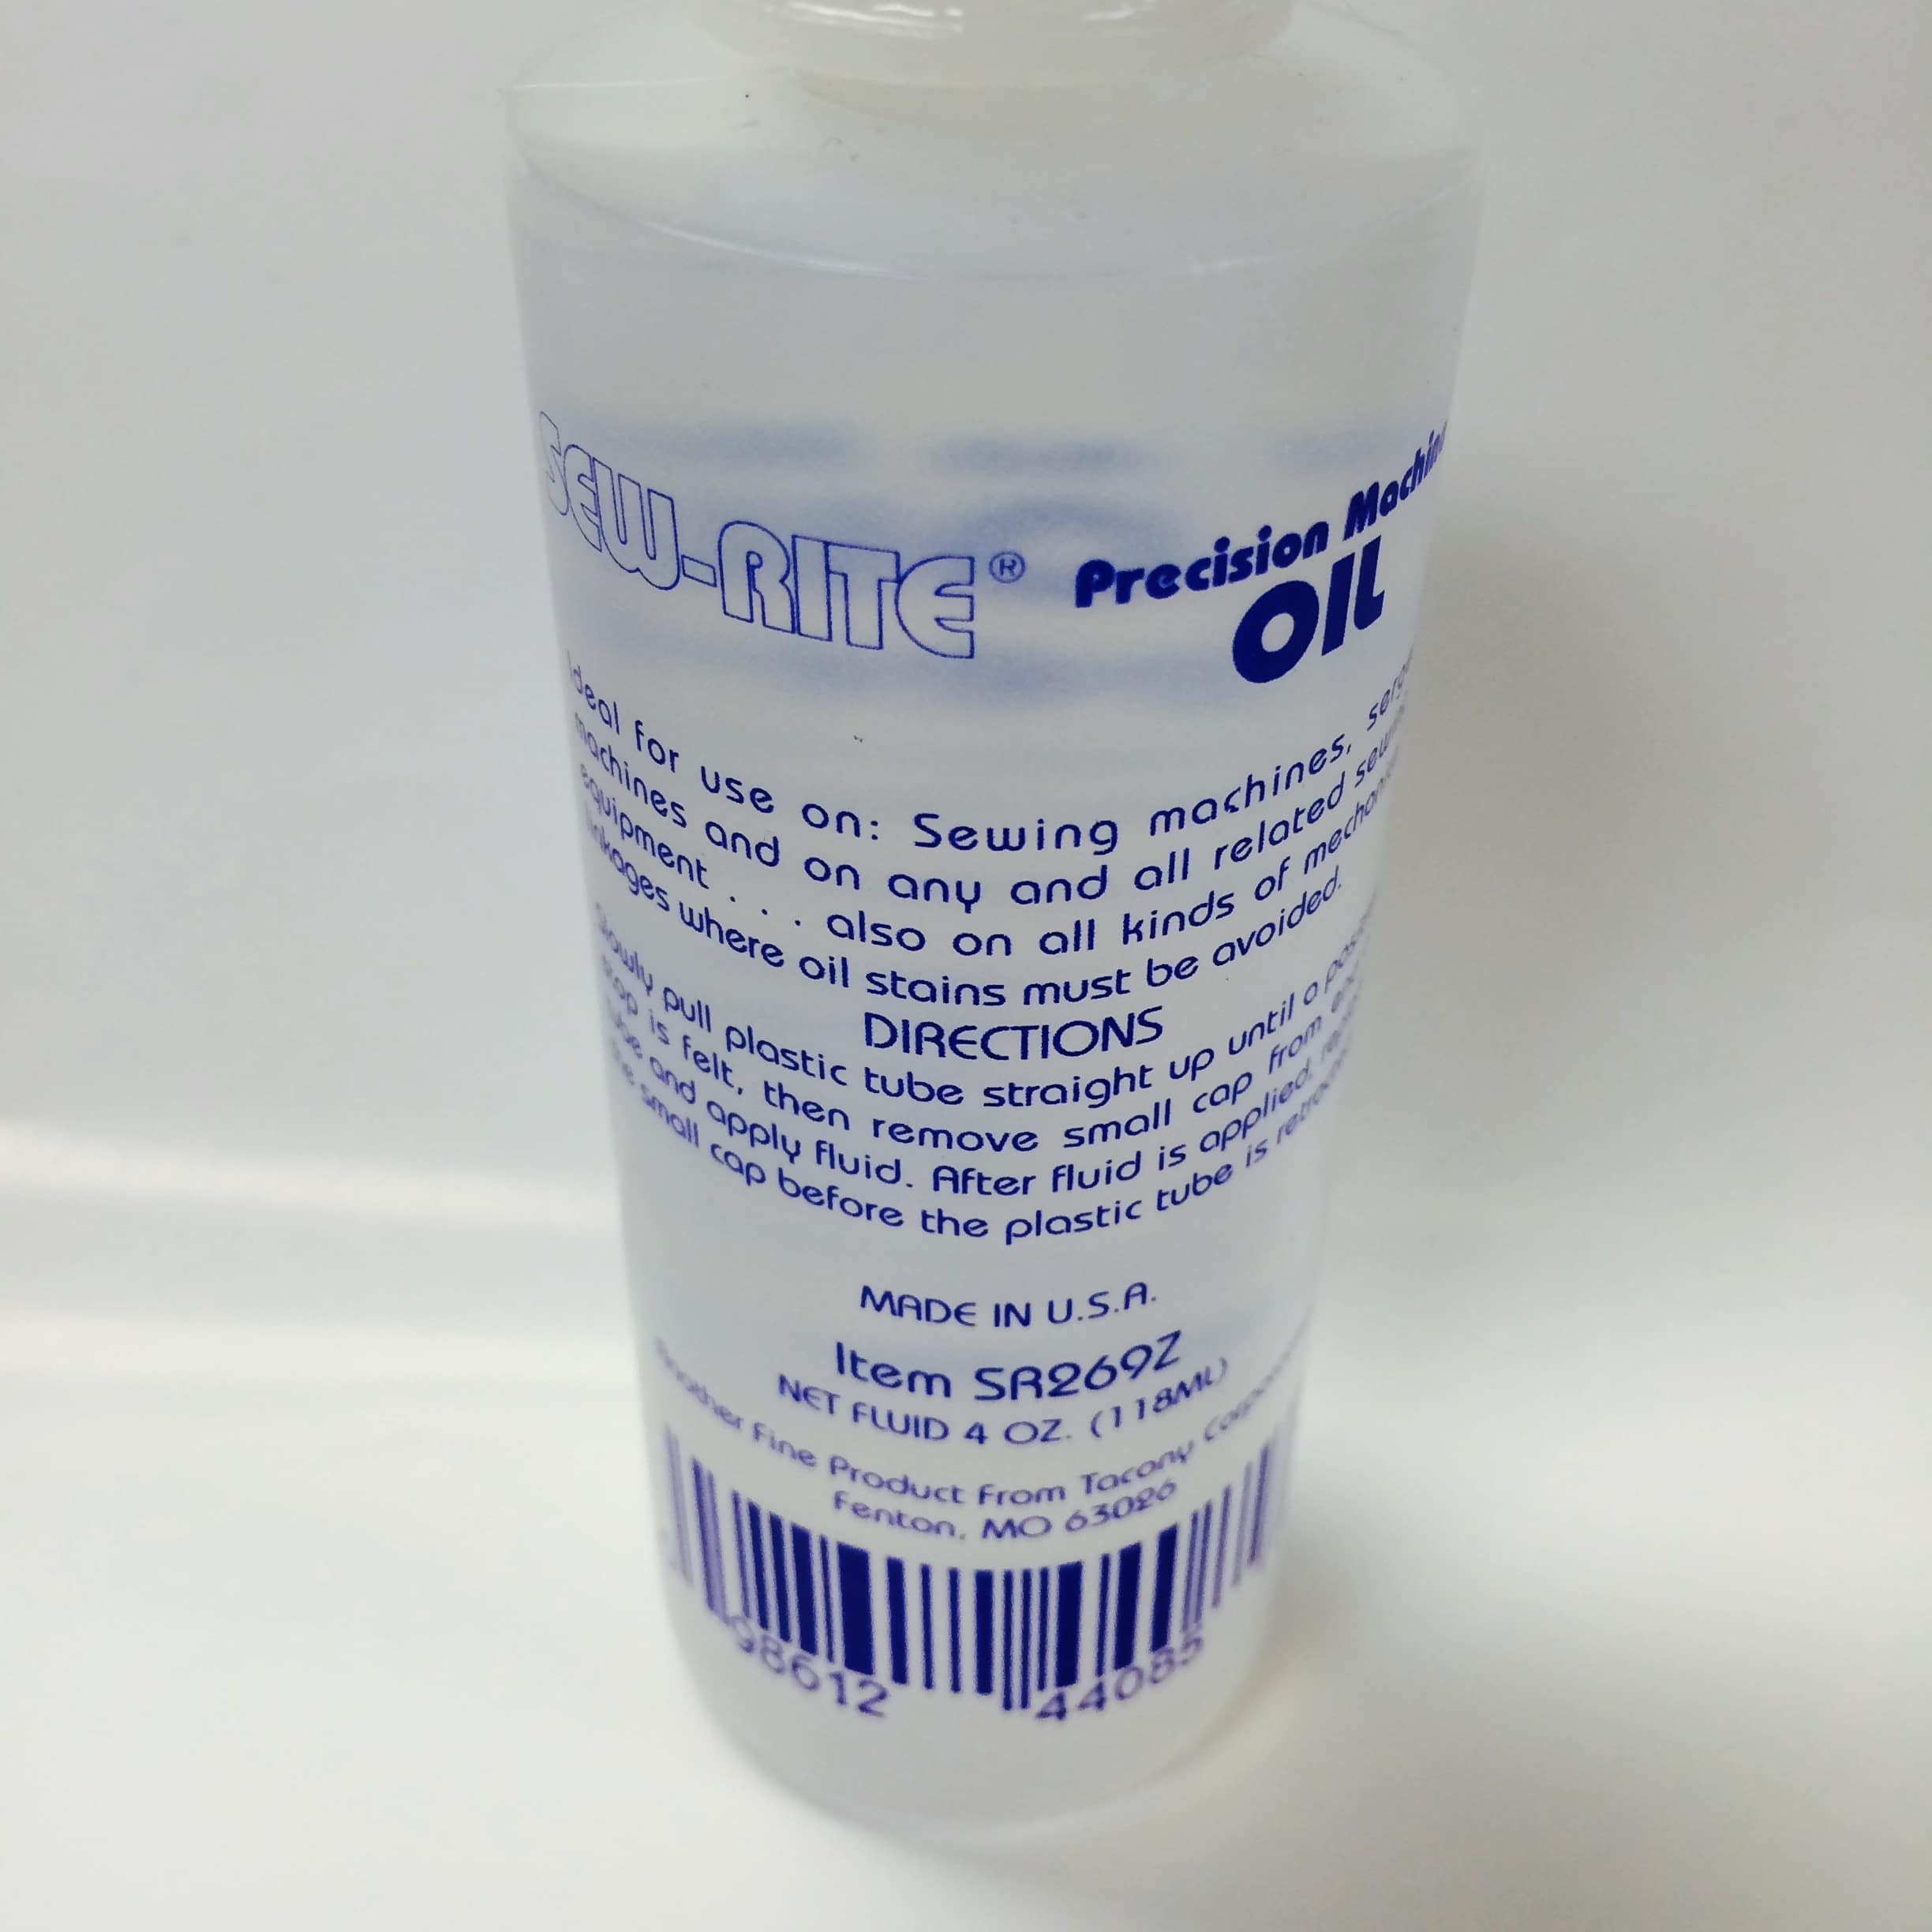 1 ~ Zoom SPOUT Oiler - 4 OZ Clear White Sewing Machine Oil Made in The USA